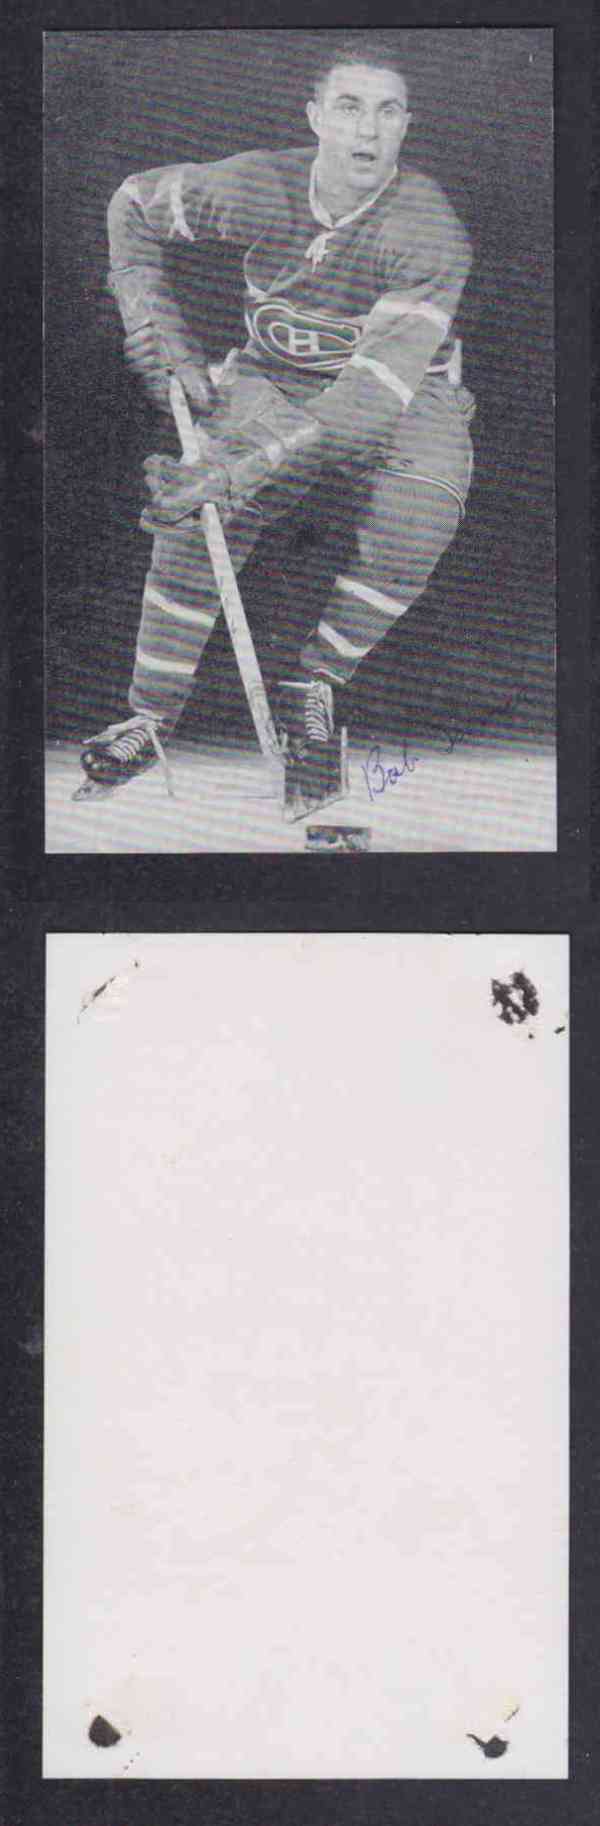 1960 'S MONTREAL CANADIENS B.TURNER  AUTOGRAPHED POST CARD photo